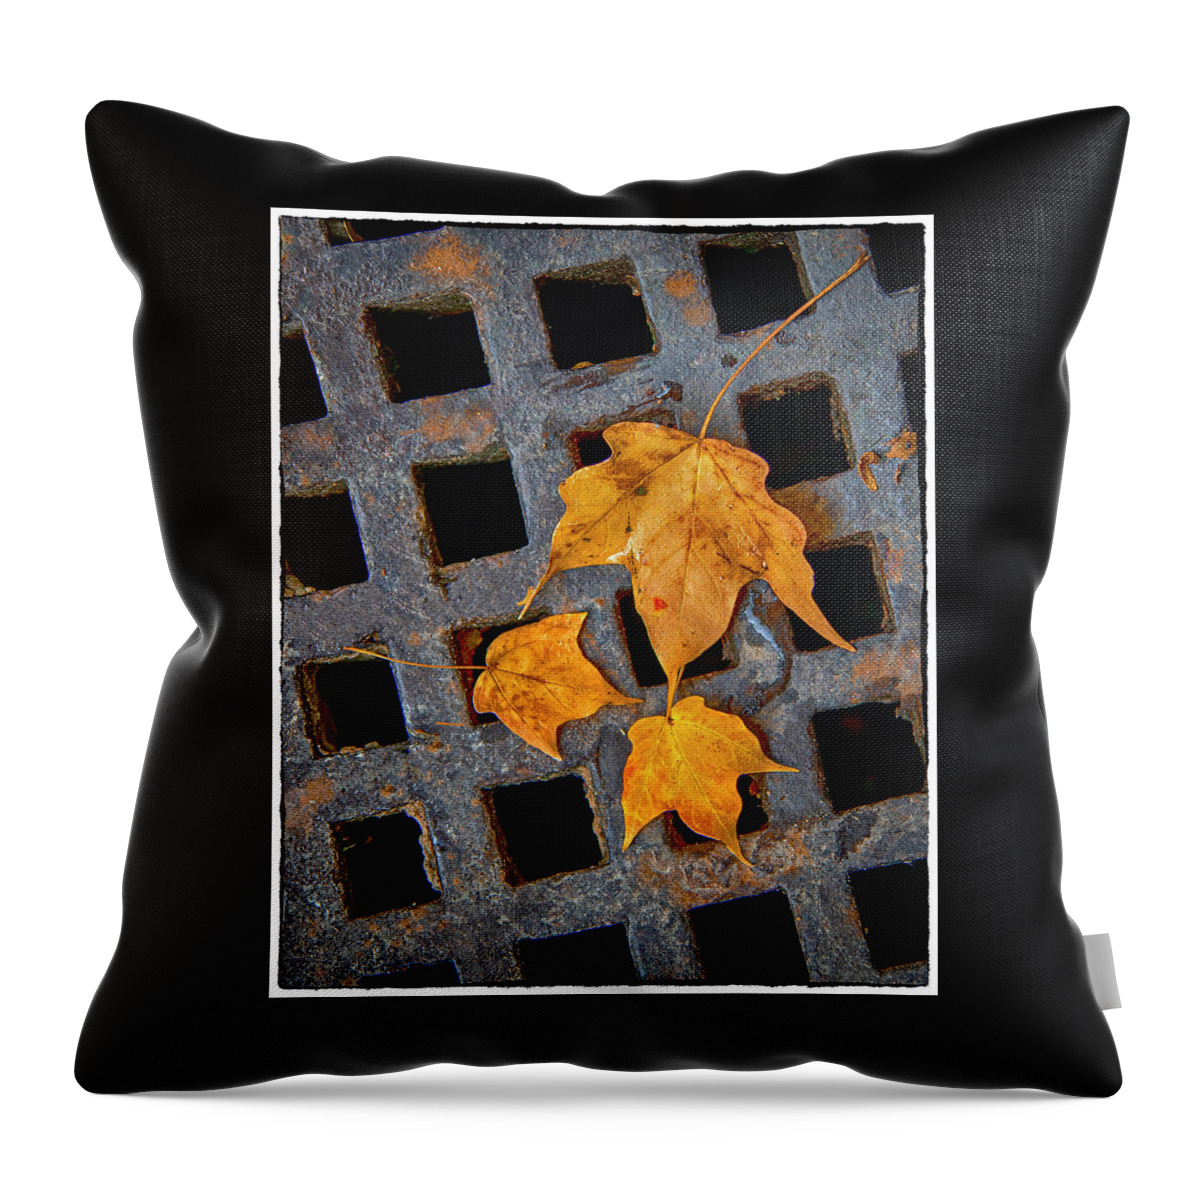 Leaves Throw Pillow featuring the photograph Grateful Leaves by Harriet Feagin